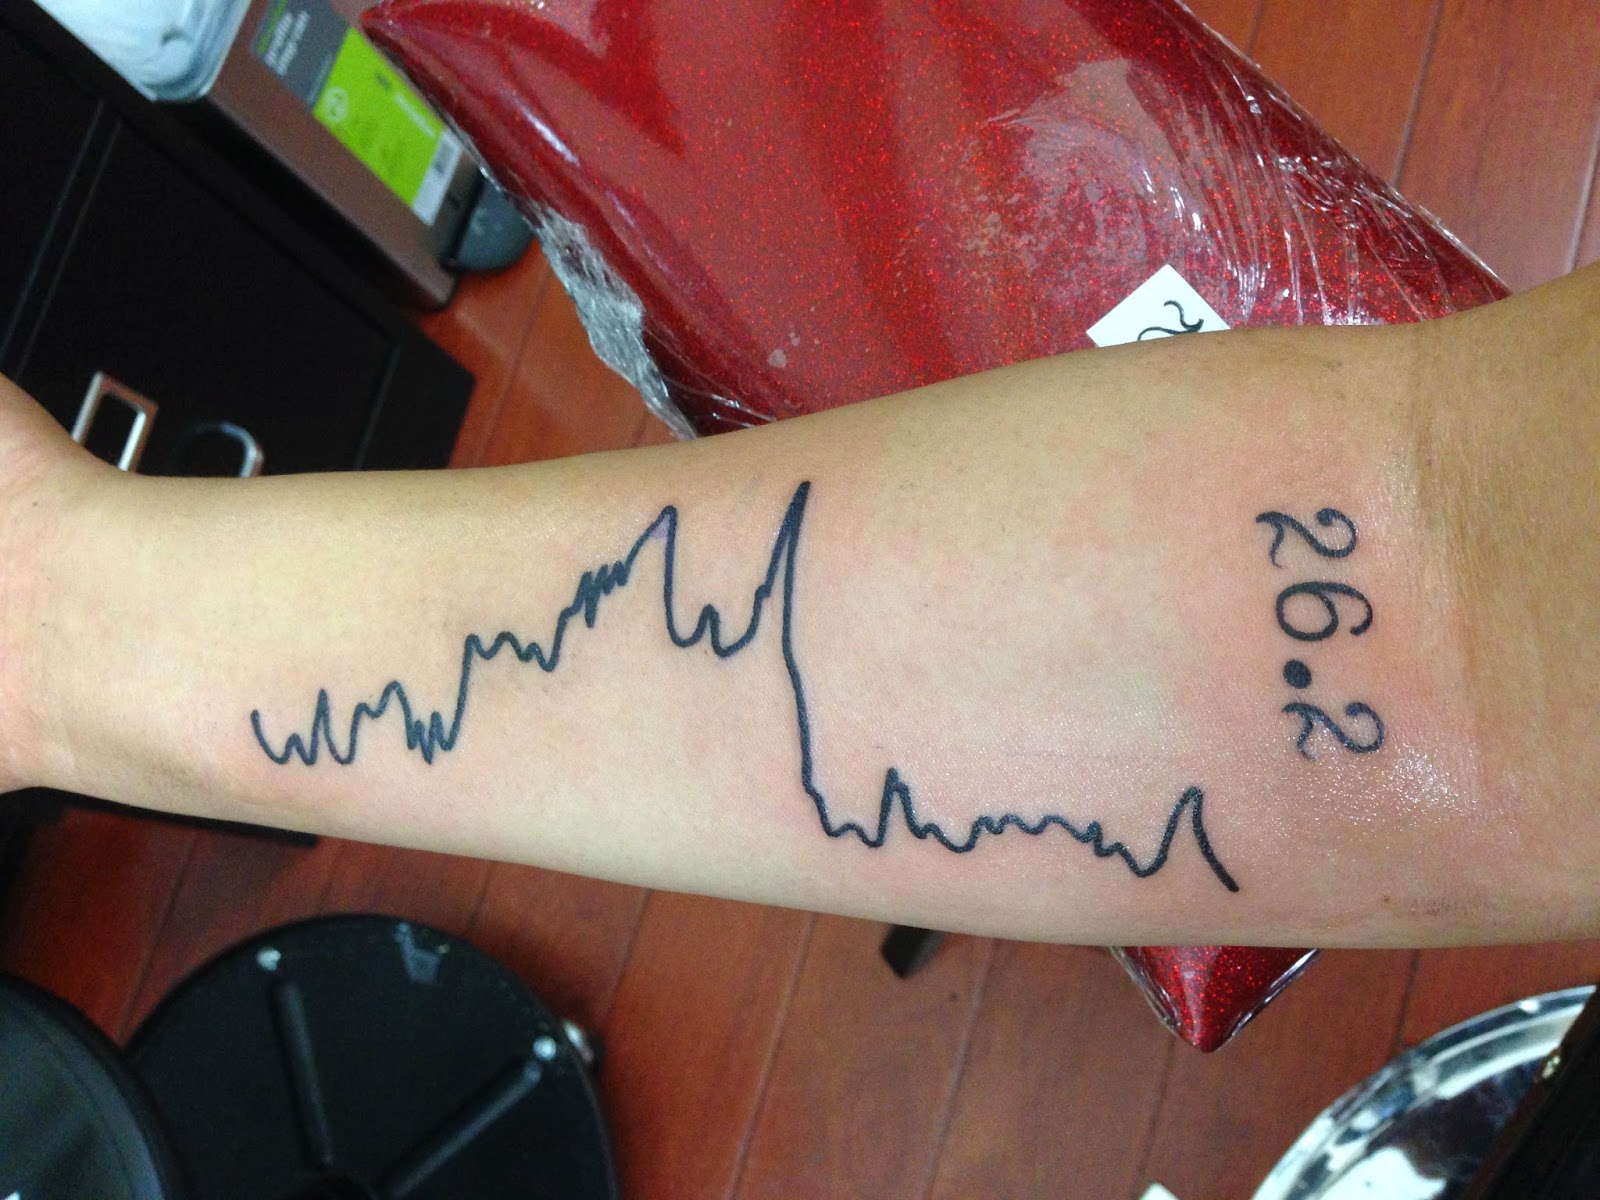 FINALLY: 30 Things, Item 26: A tattoo to commemorate my first marathon